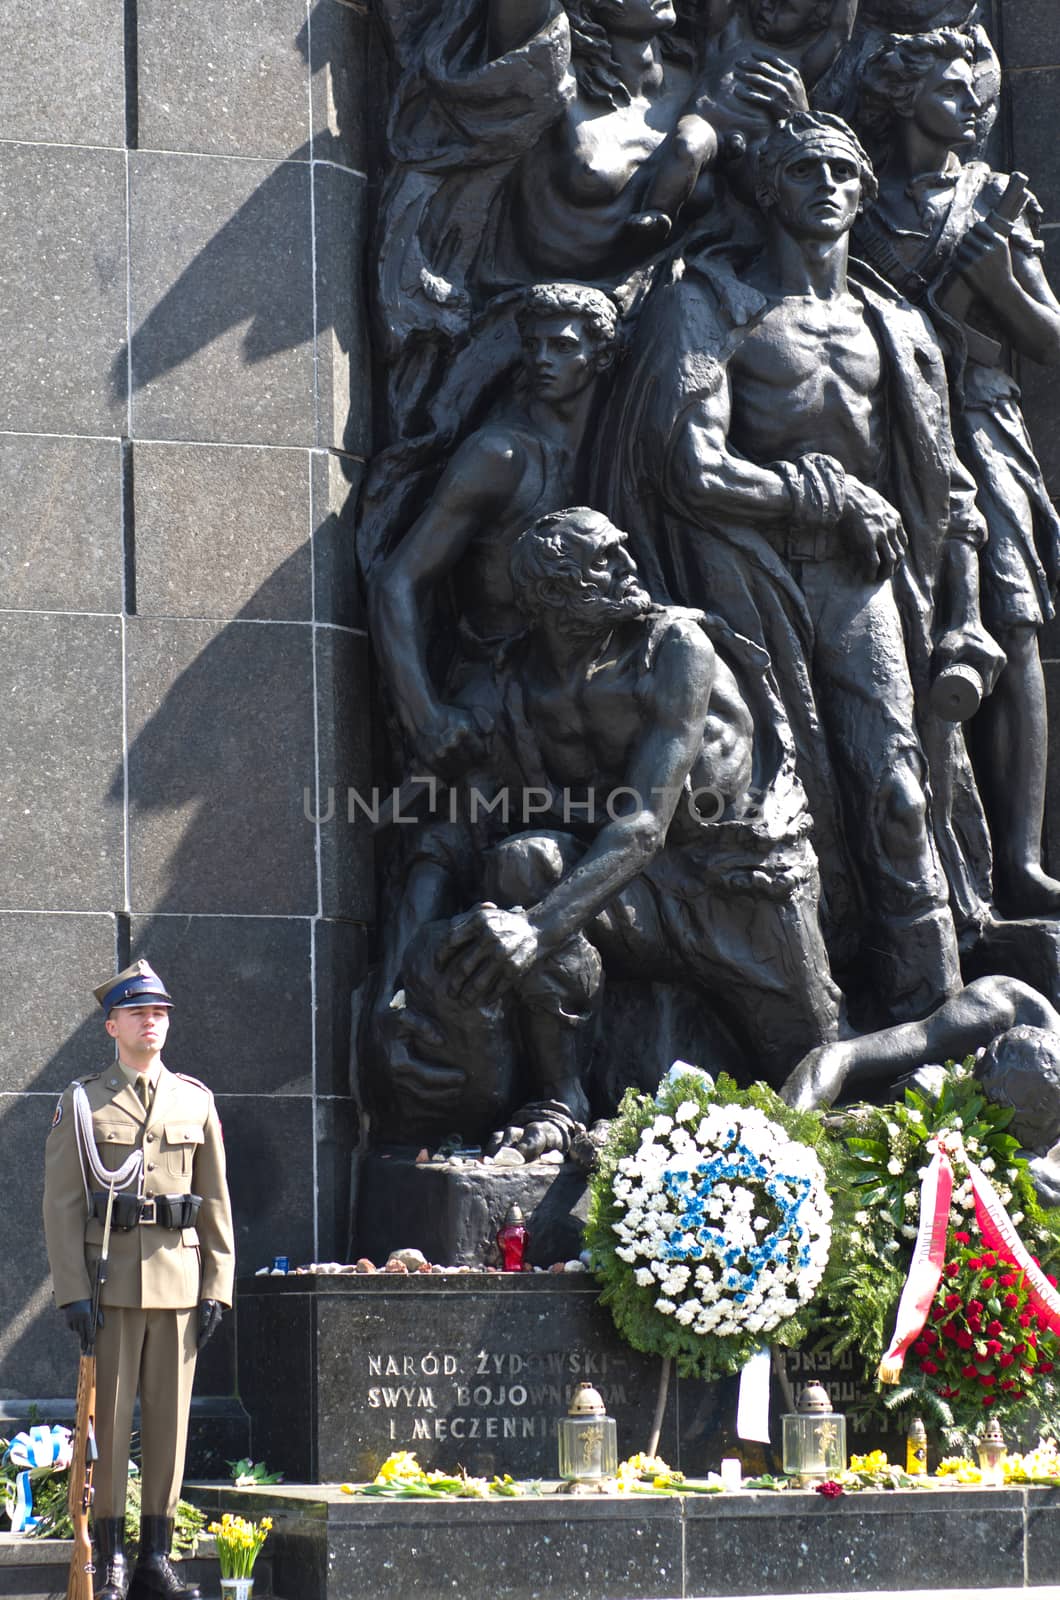 Warsaw, Poland – April 19, 2014: Celebration of the 71 anniversary of the Warsaw Ghetto Uprising.